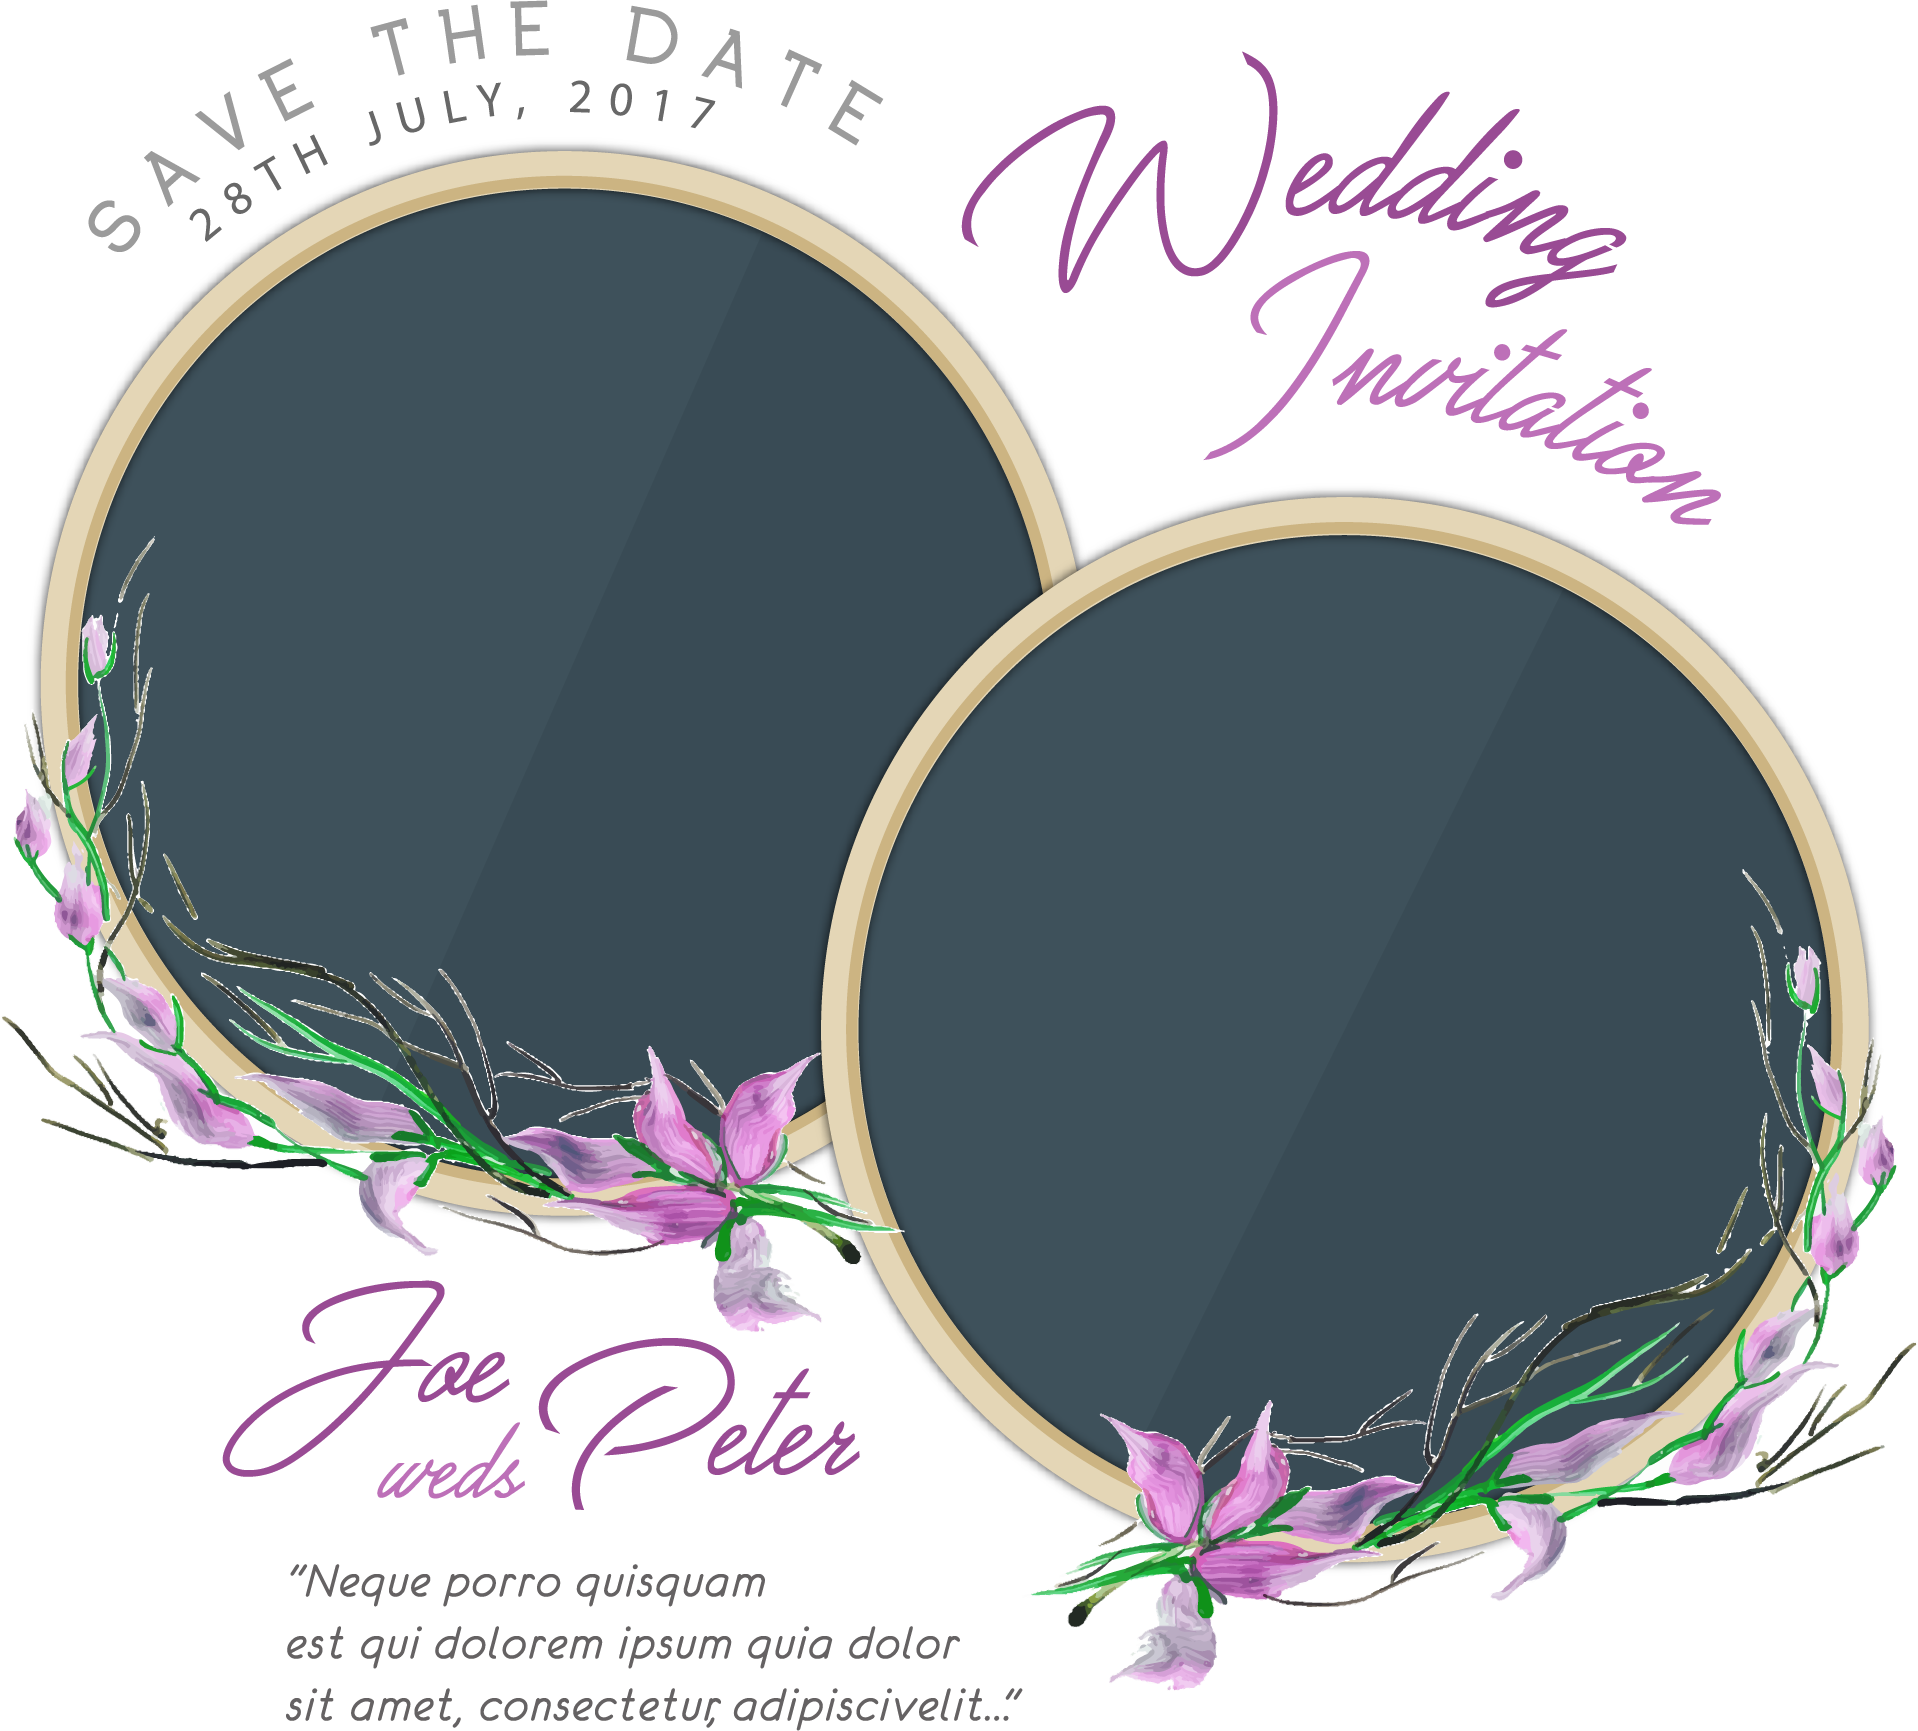 Couple Invitation Wedding PNG Image High Quality Clipart